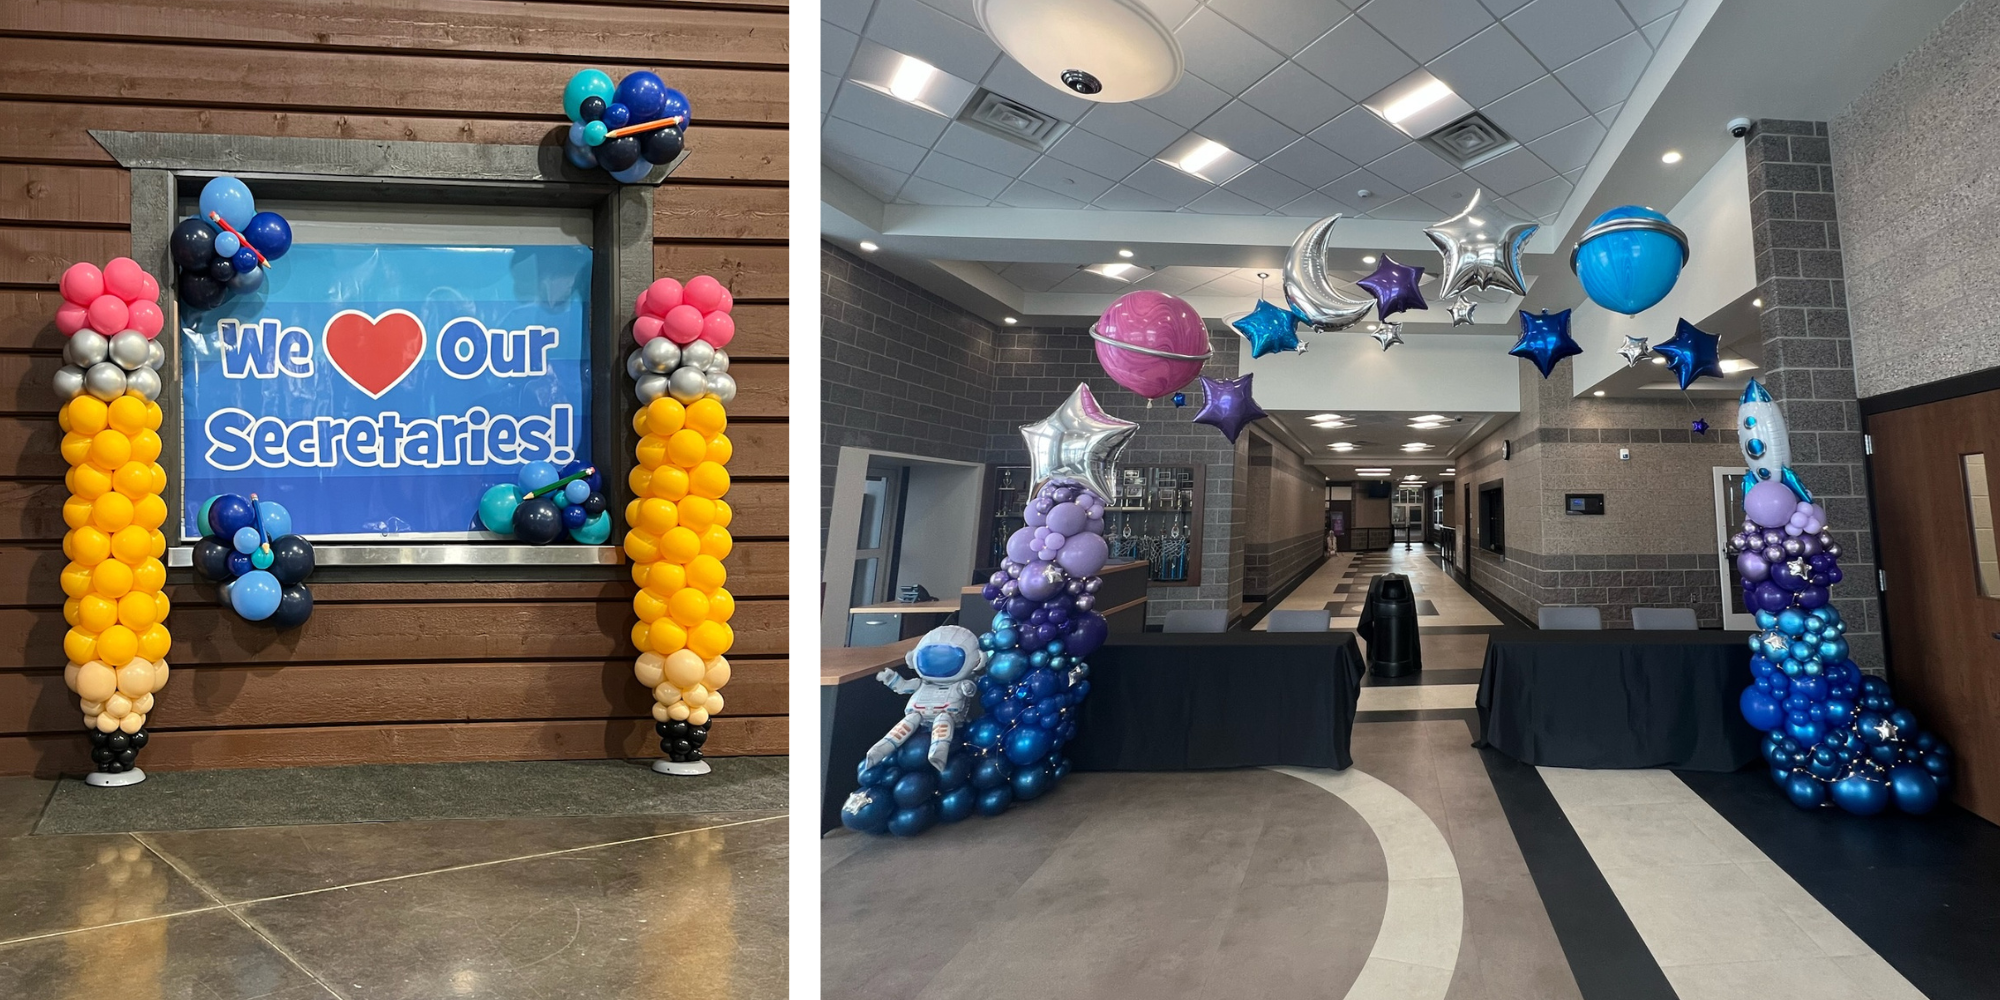 Left: Balloon pencil sculptures are the perfect balloons for secretary appreciation day. Right: an "Out of this World" themed family ball starts off with this colorful balloon arch in American Fork, Utah